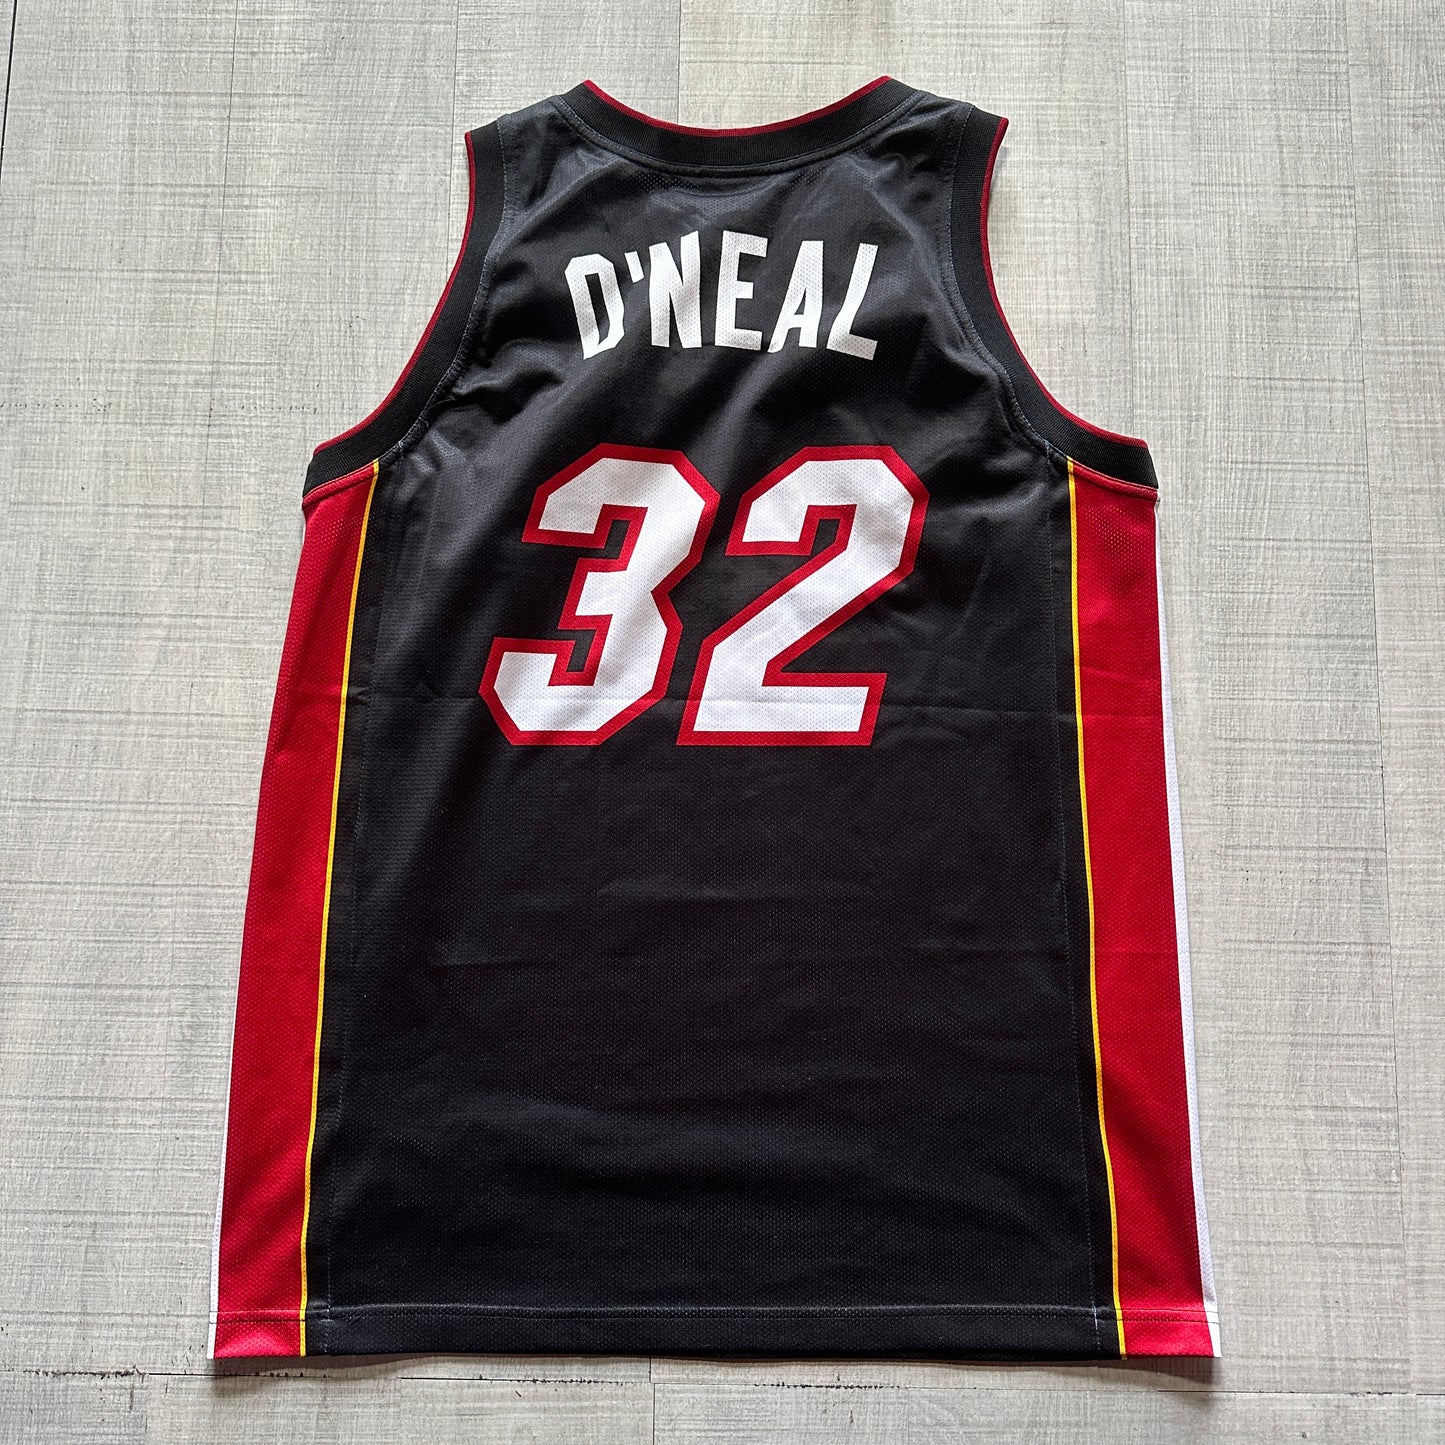 Shaquille O’Neal Miami Heat Champion Jersey